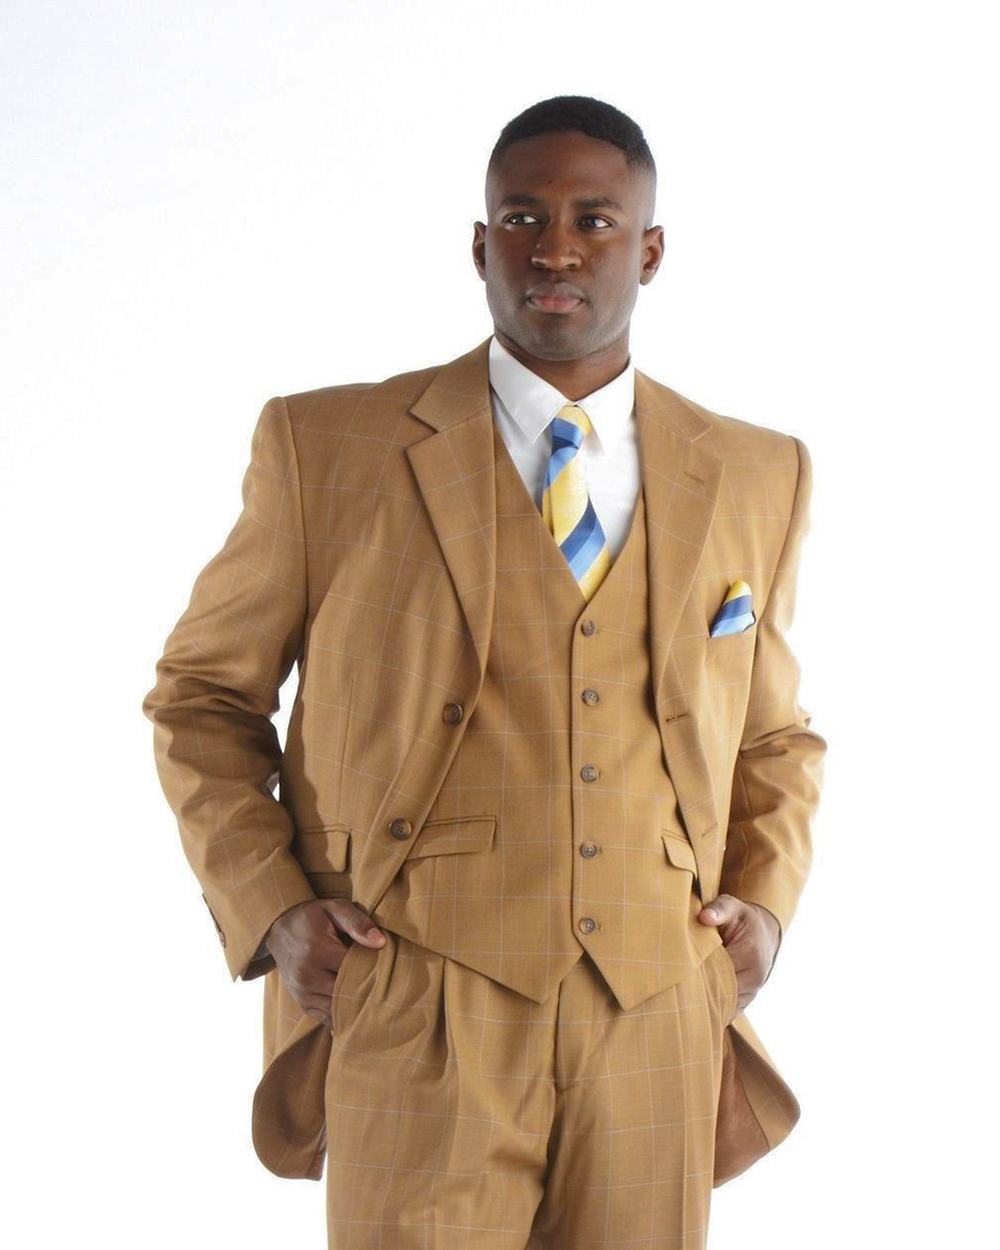 Wearing a cognac three-piece suit, white dress shirt and yellow/blue tie